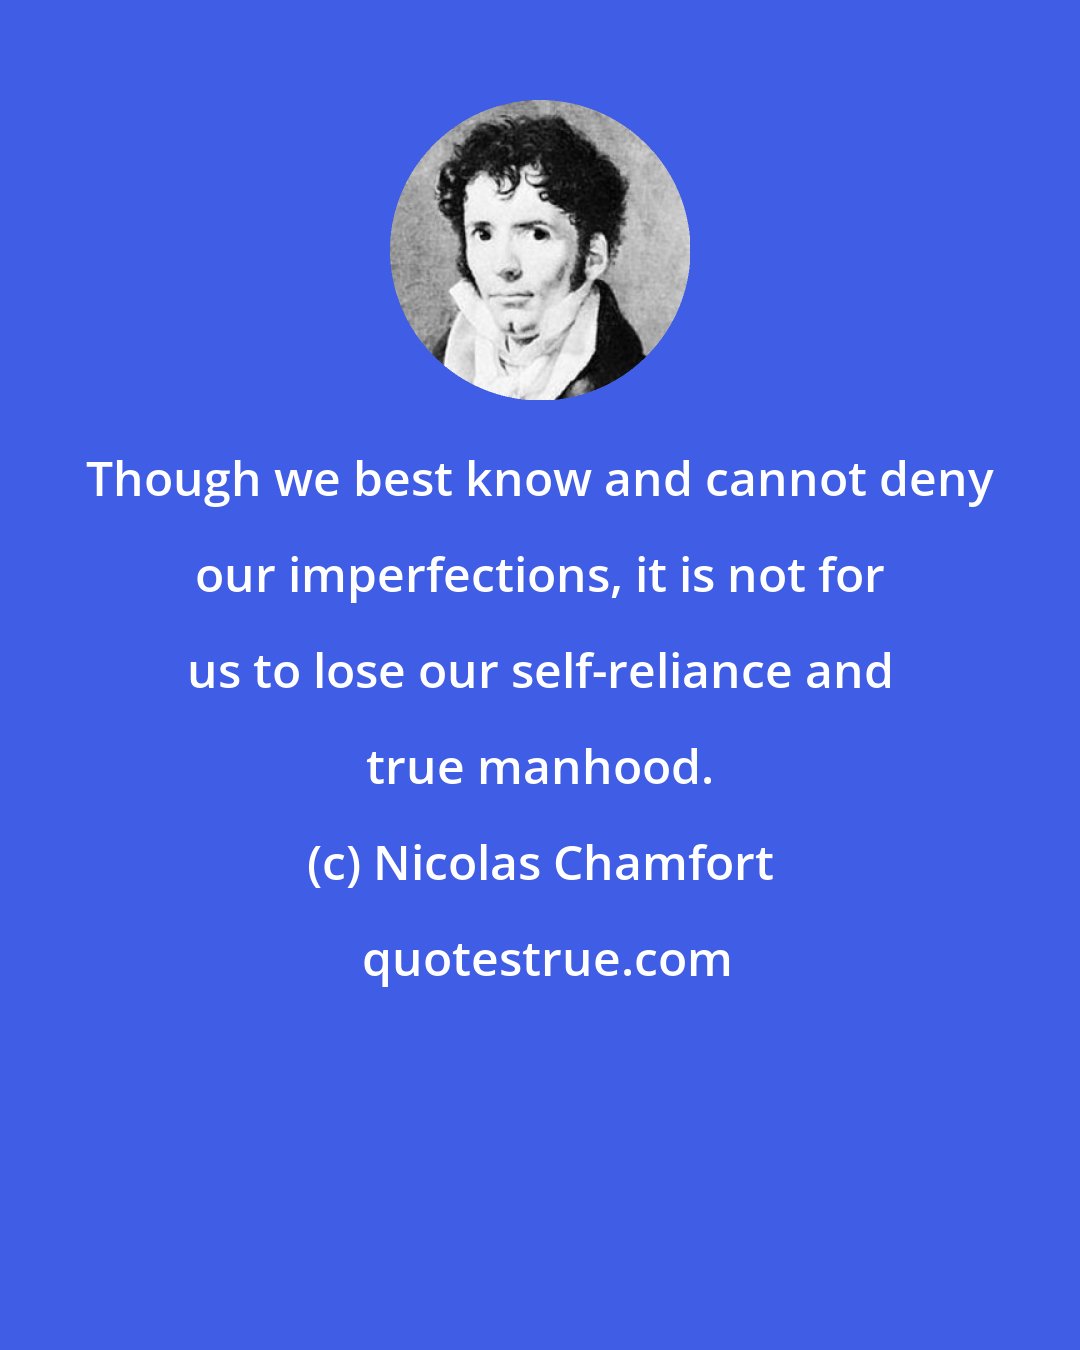 Nicolas Chamfort: Though we best know and cannot deny our imperfections, it is not for us to lose our self-reliance and true manhood.